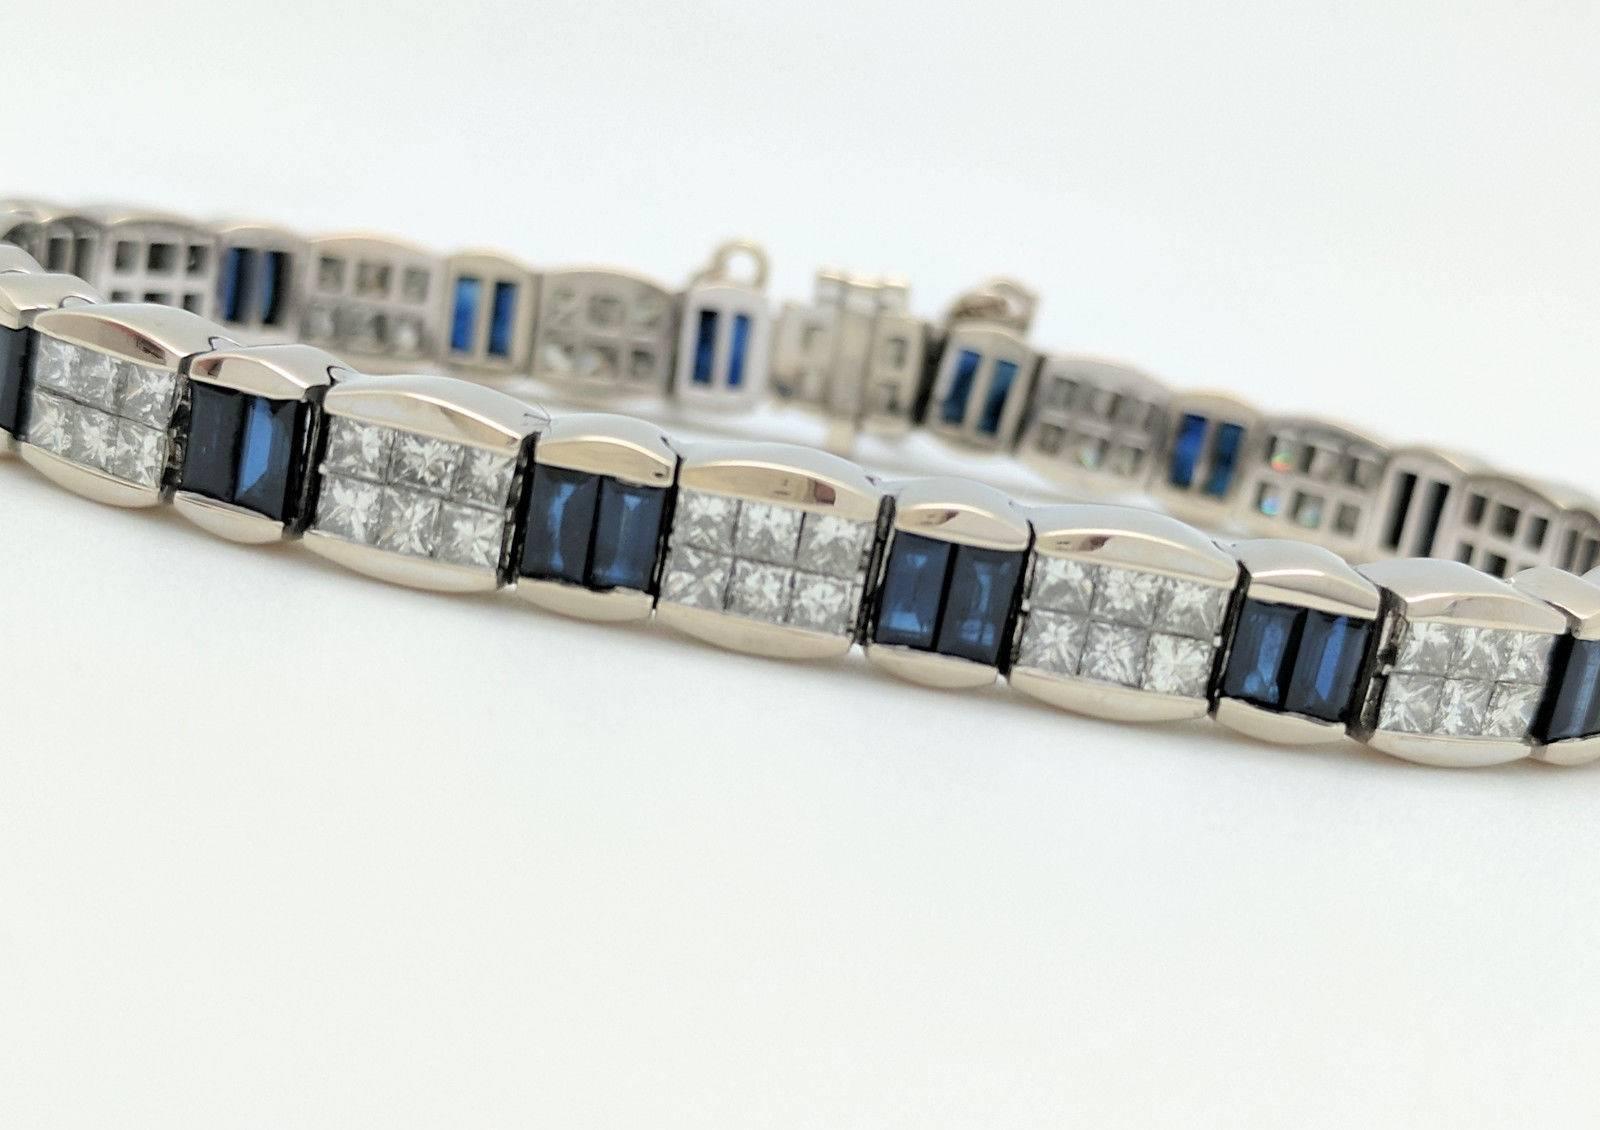 You are viewing a Beautiful Diamond & Sapphire Tennis Bracelet. This bracelet is crafted from 18k white gold, measures 6mm in width and weighs 33.9 grams. It features 94 .05ct princess cut natural diamonds, for an estimated 4.7 carats of